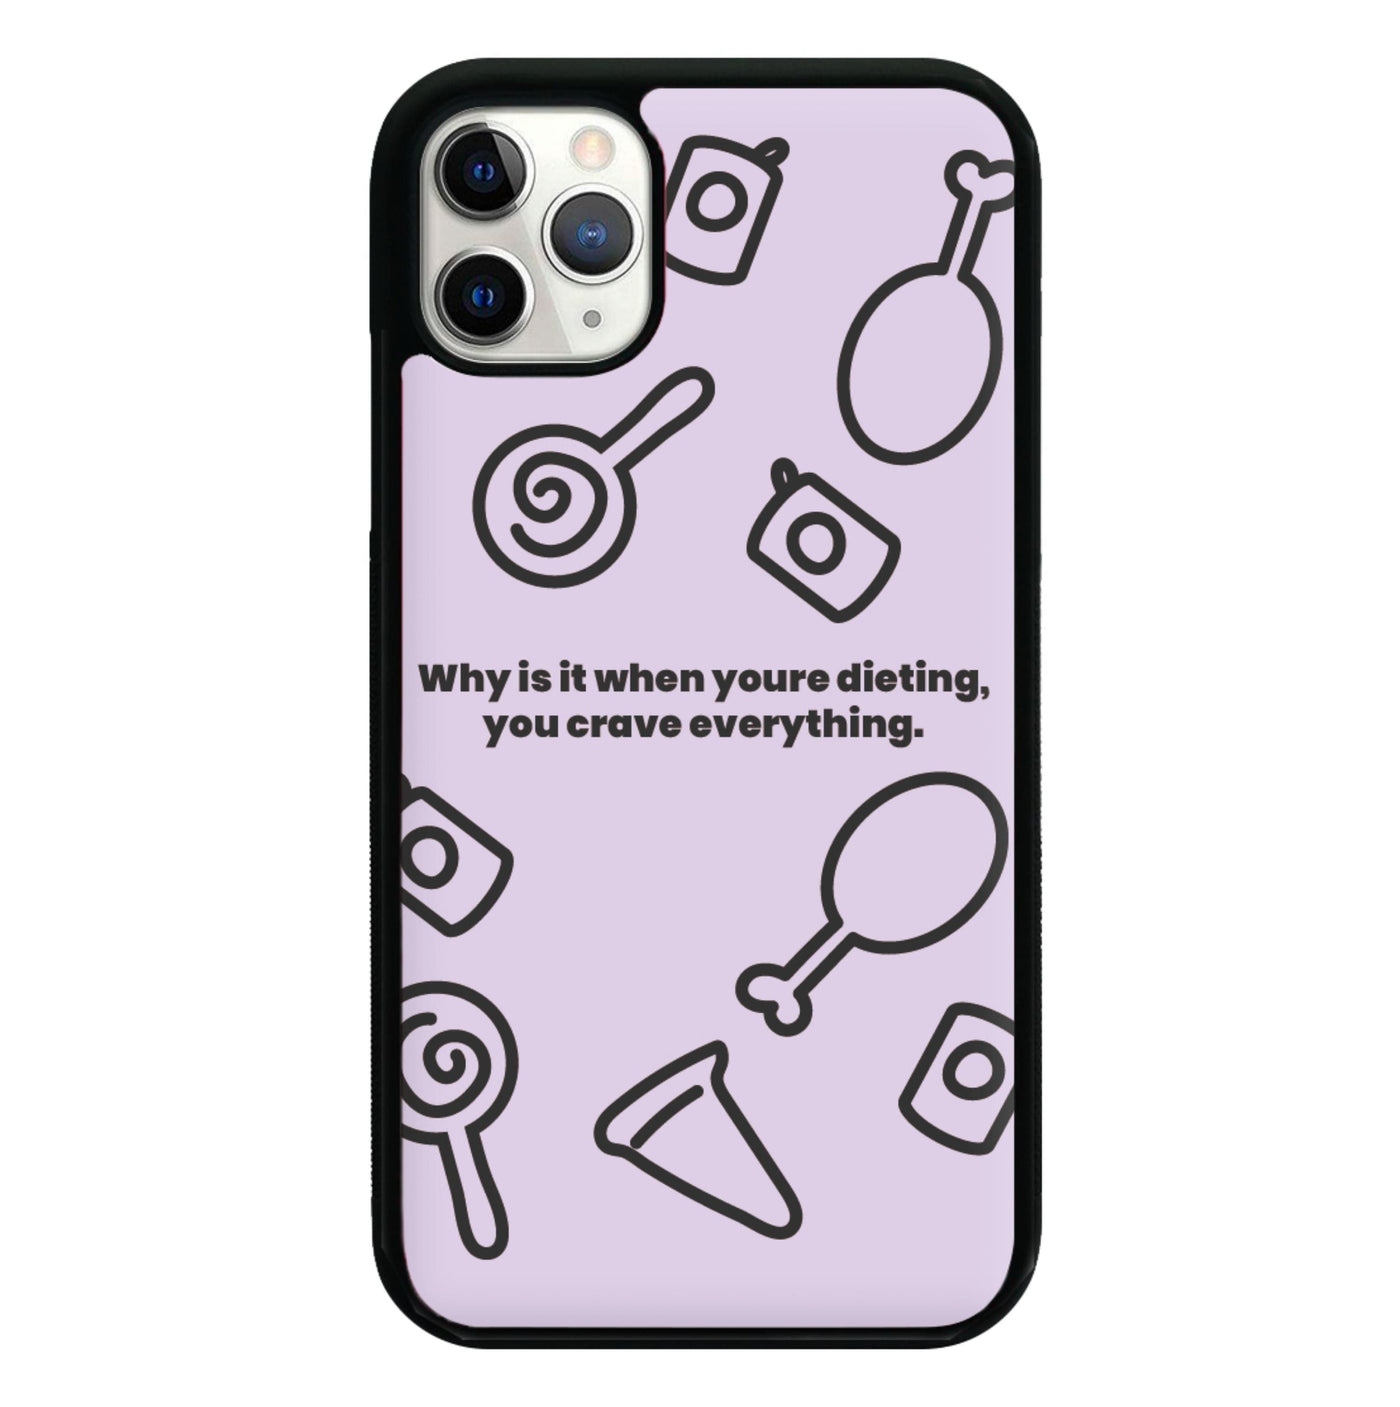 Why is it when youre dieting, you crave evrything - Kim Kardashian Phone Case